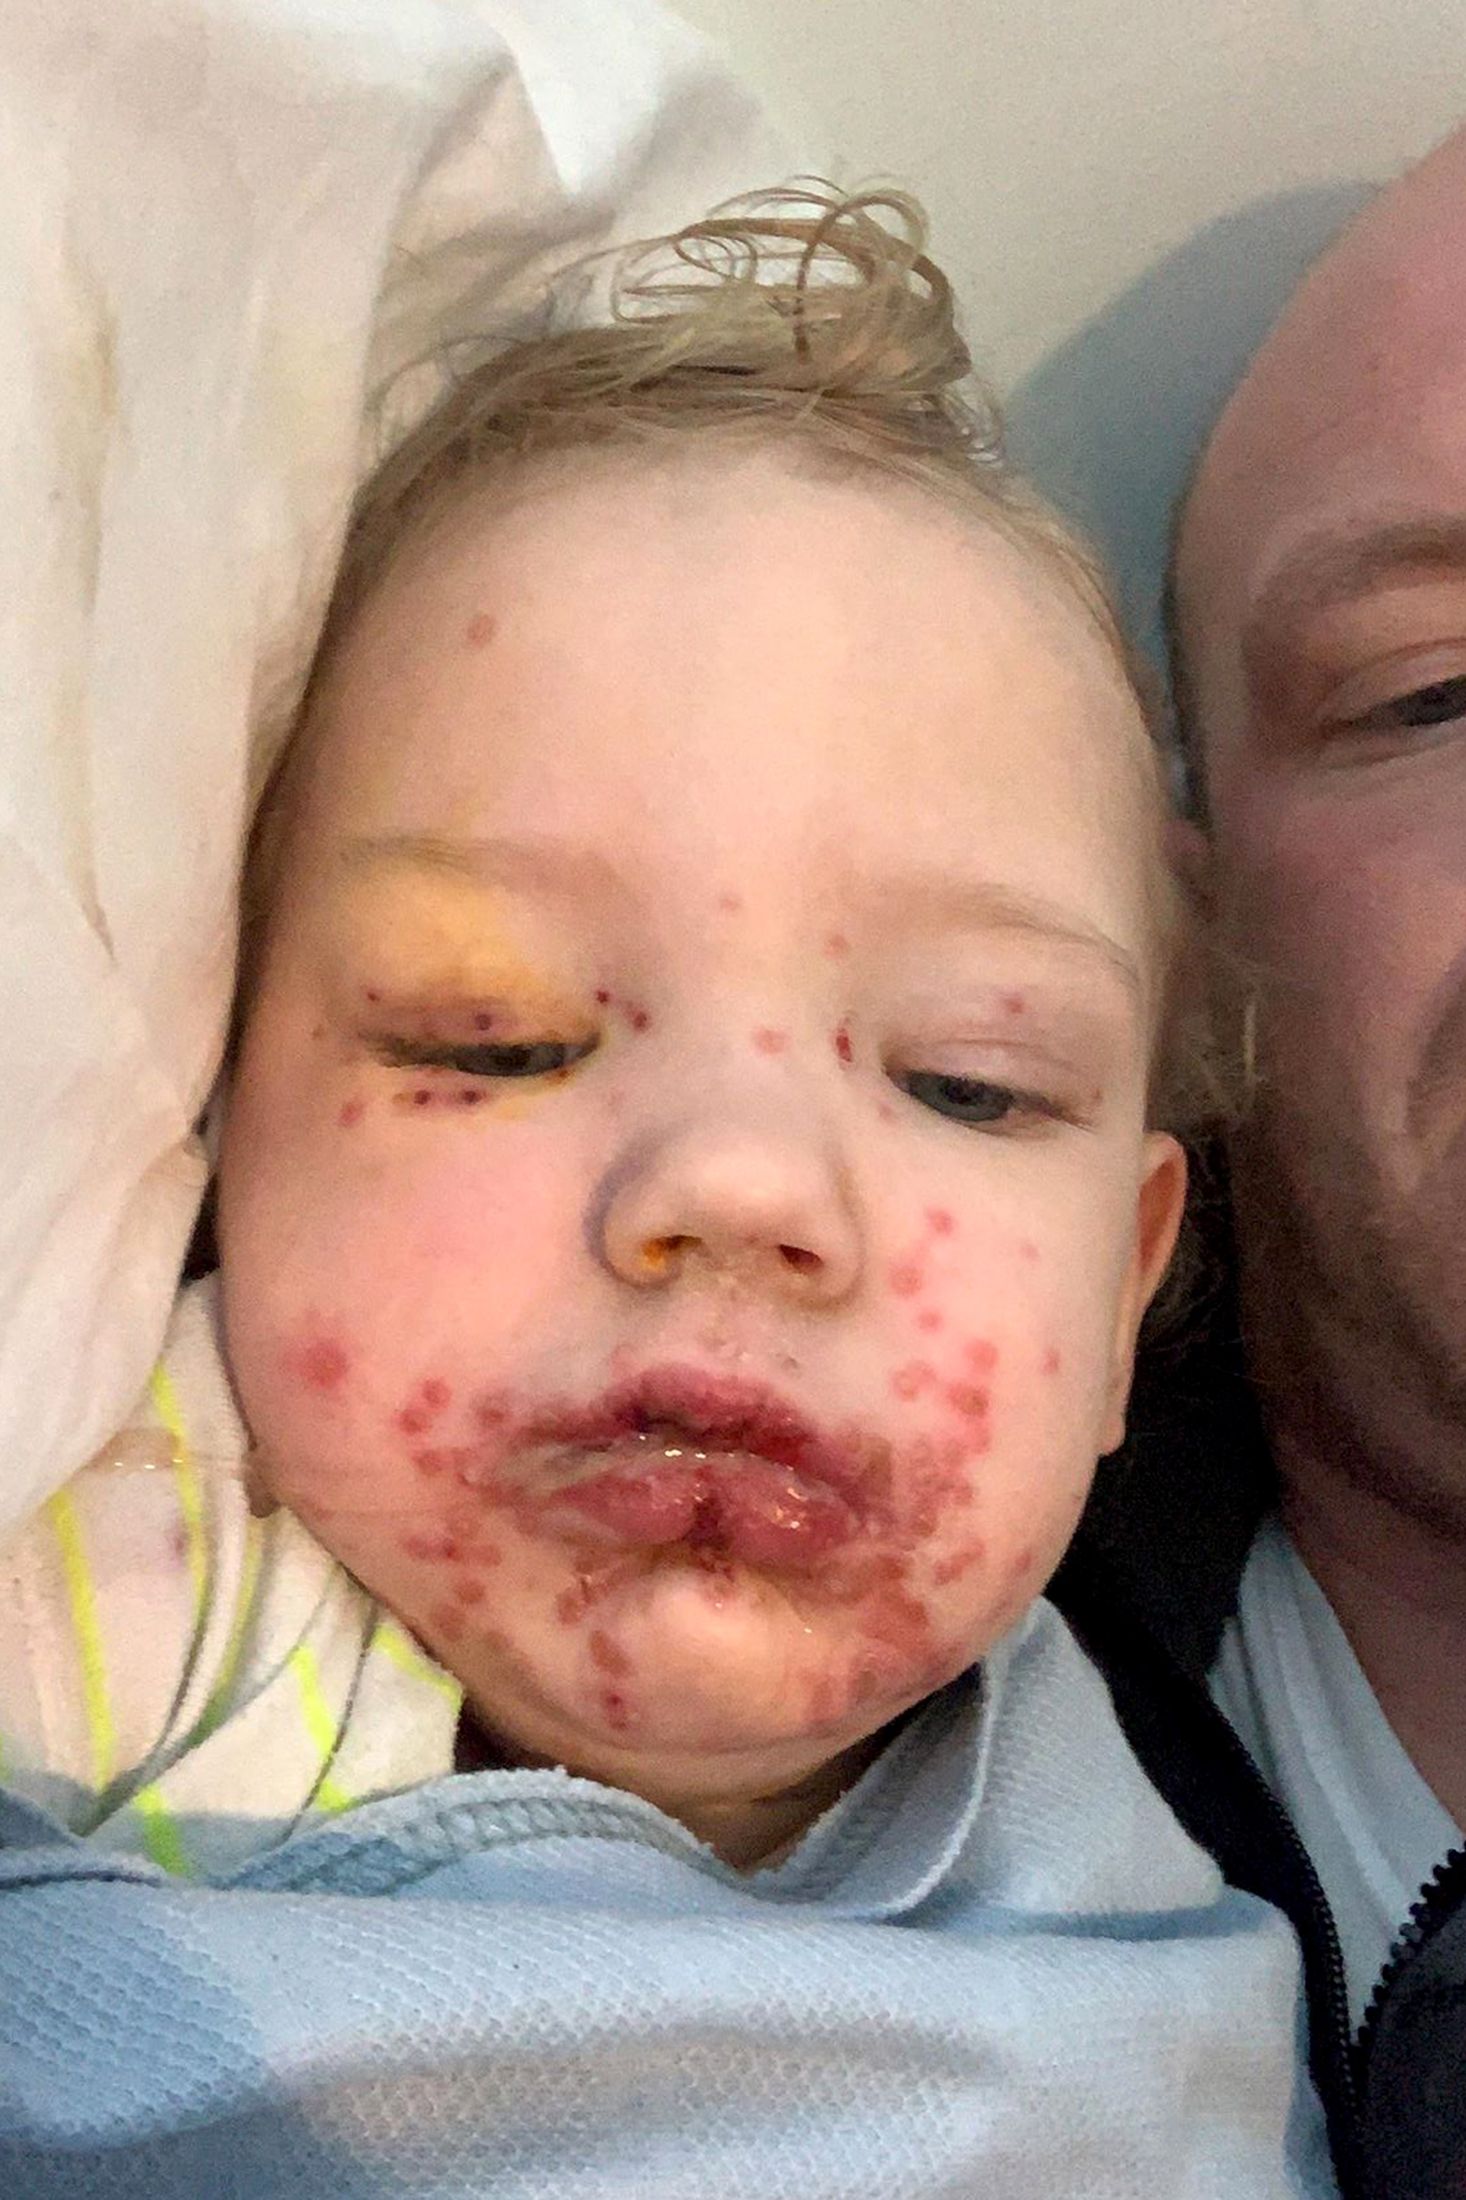 Parents of toddler ravaged by herpes across face shares photo as ...